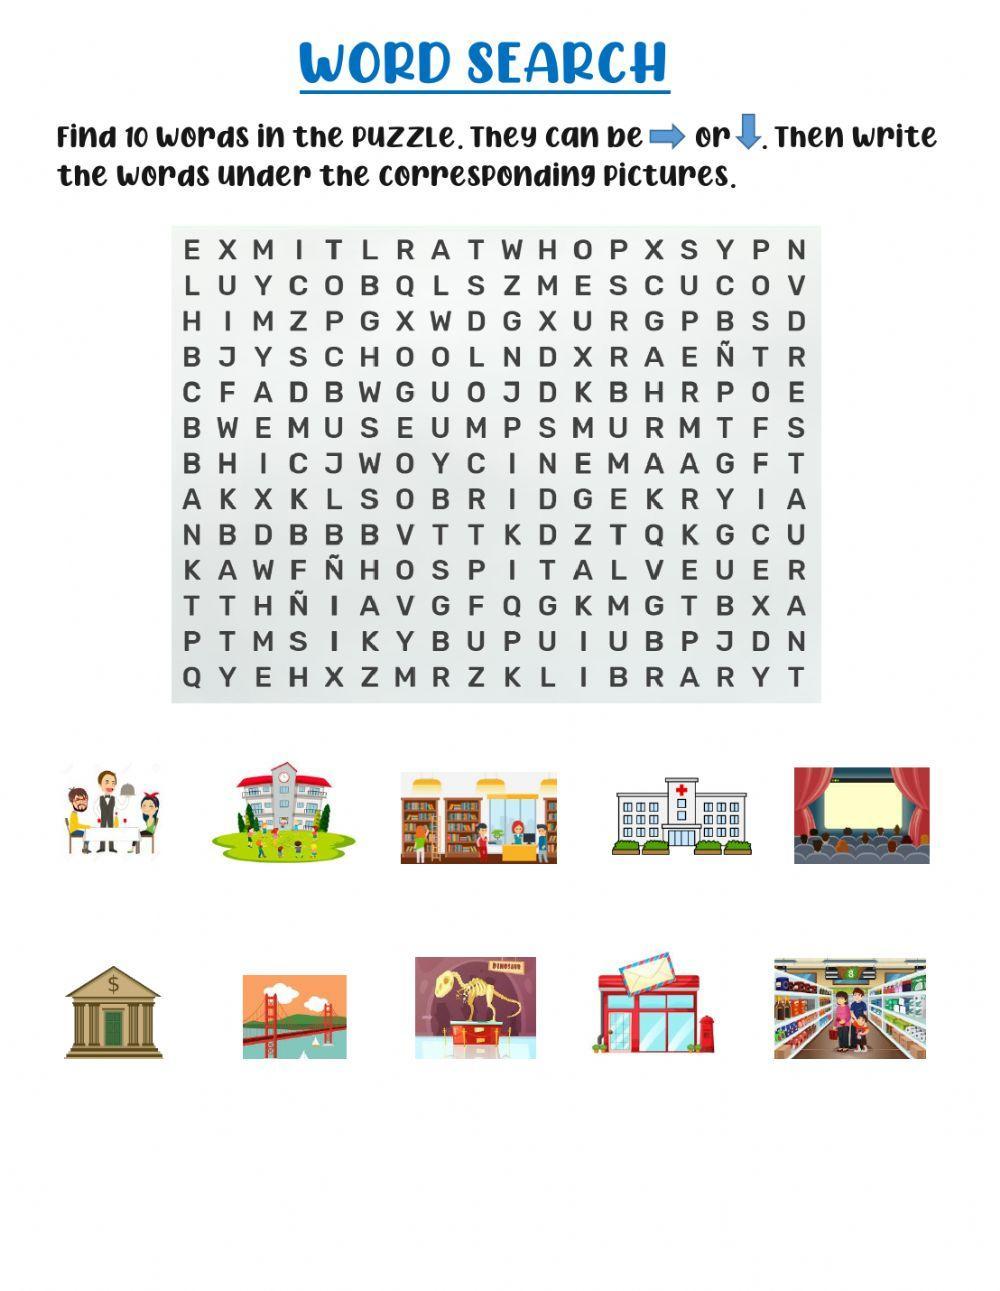 Places in town WORD SEARCH